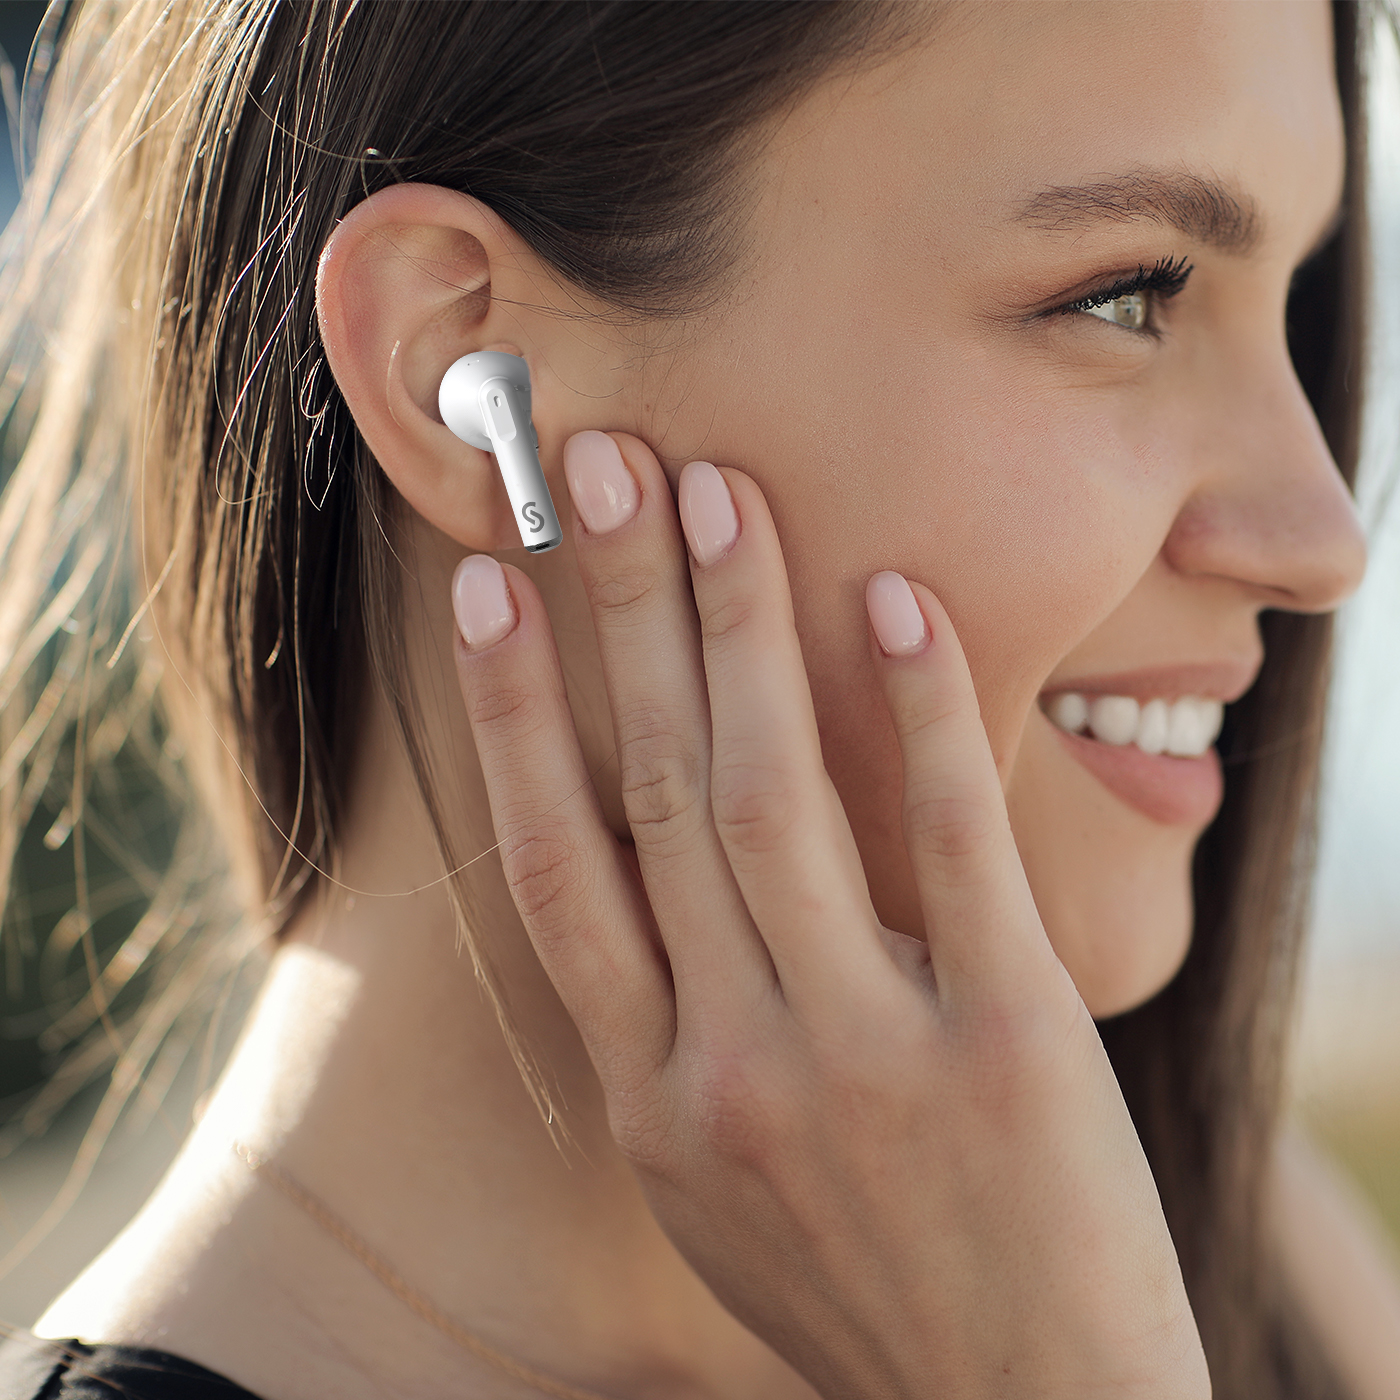 Introducing Sounarc Q1 Bluetooth 5.3 TWS Earbuds: Hear,Feel, and Love Every Beat